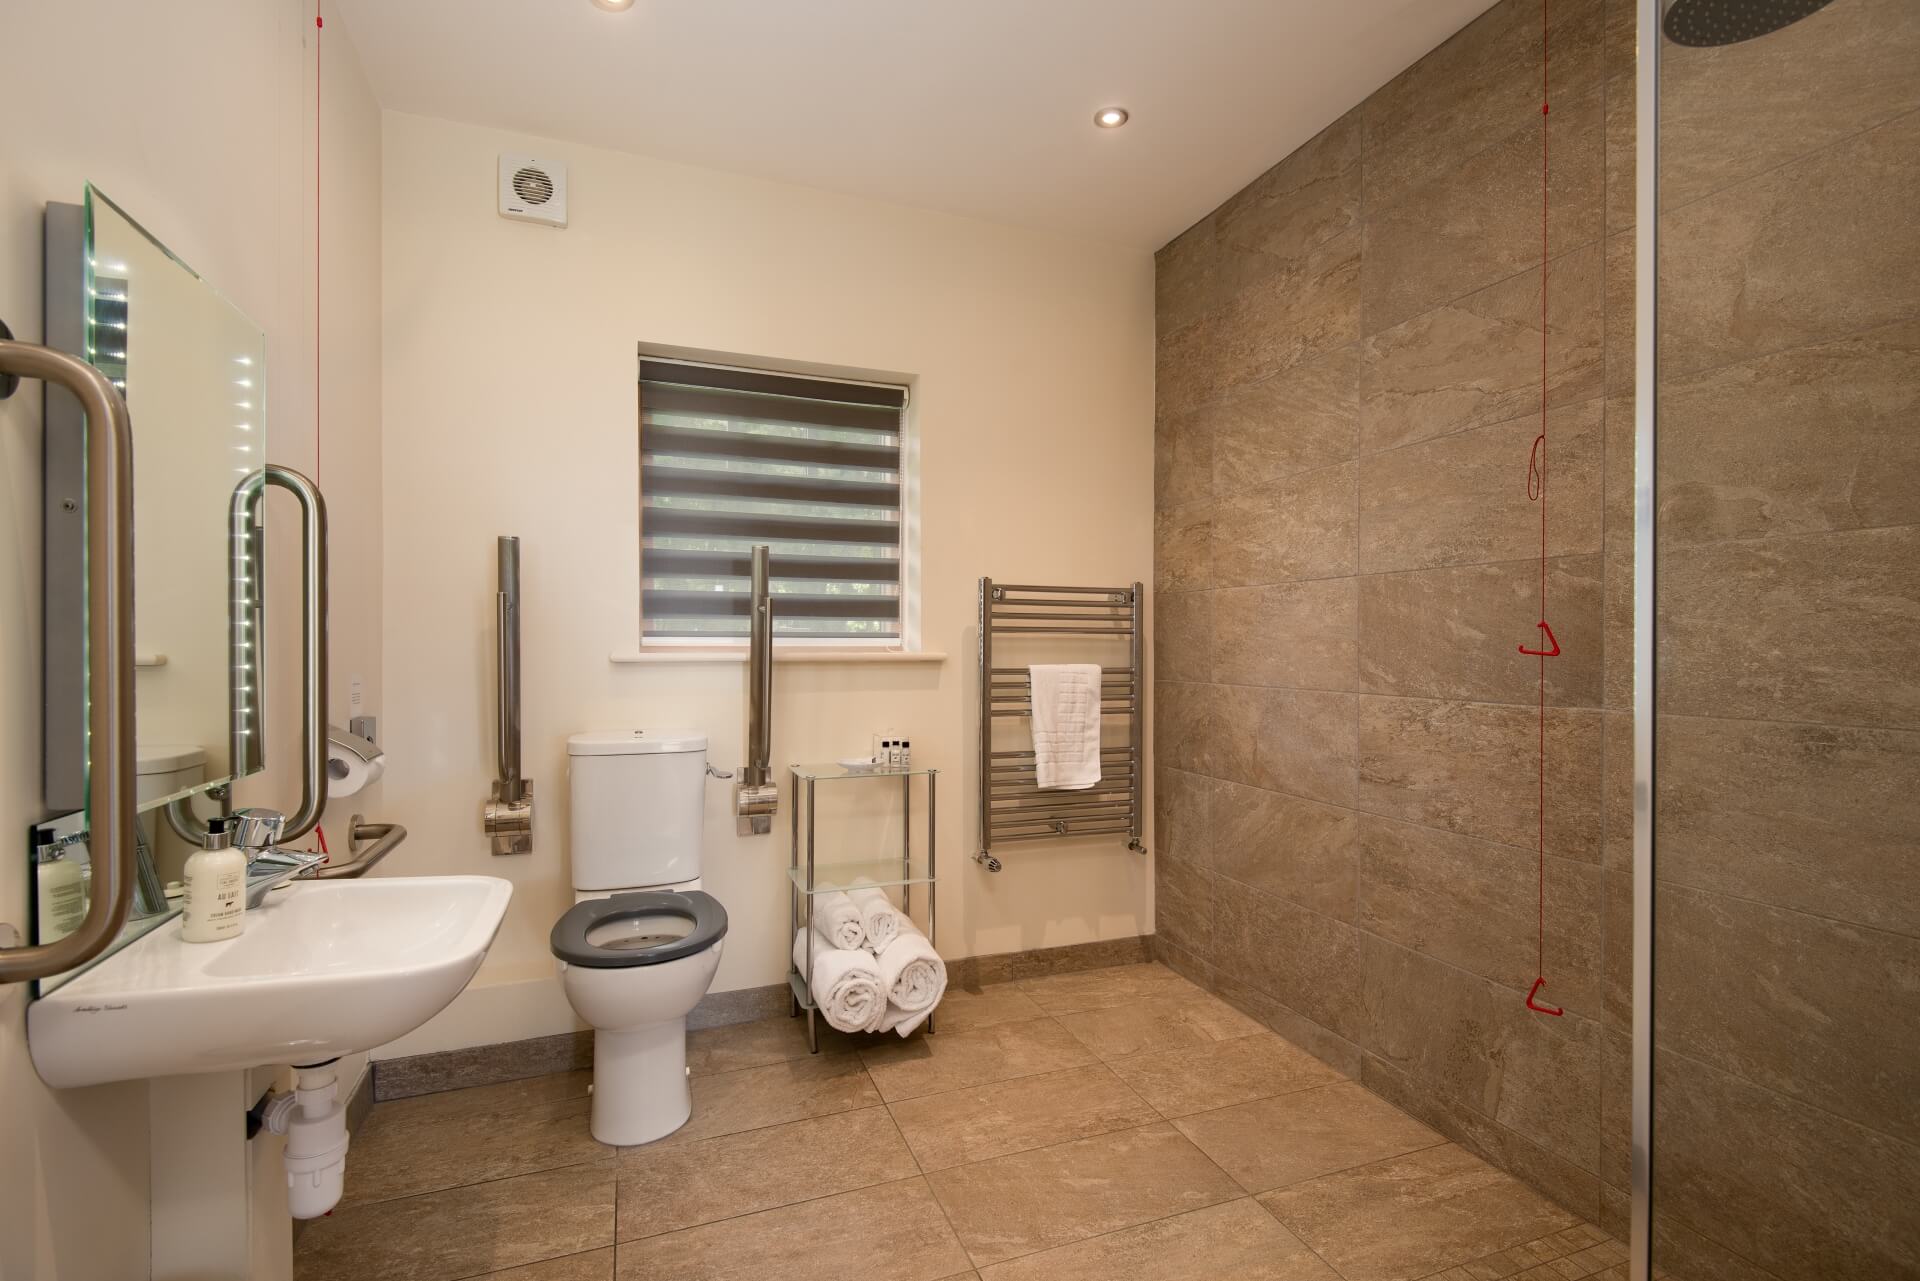 Accessible Room Ensuite Wet Room